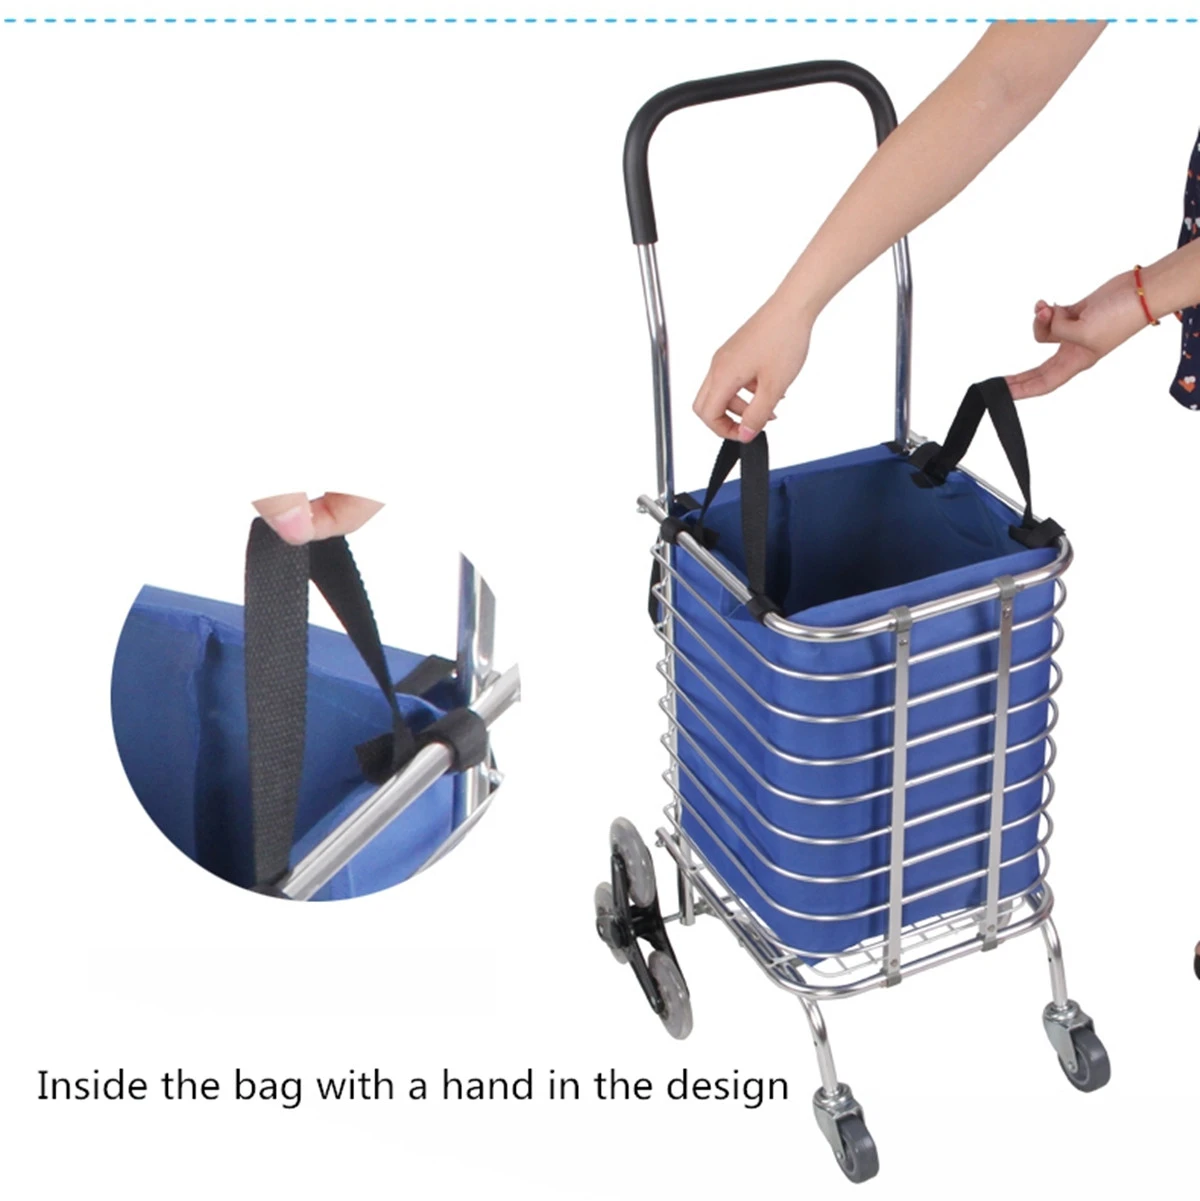 Supermarket Trolley Shopping Organizer Tote Eco Grocery Extend Cart Clips Reusable Foldable Handbag